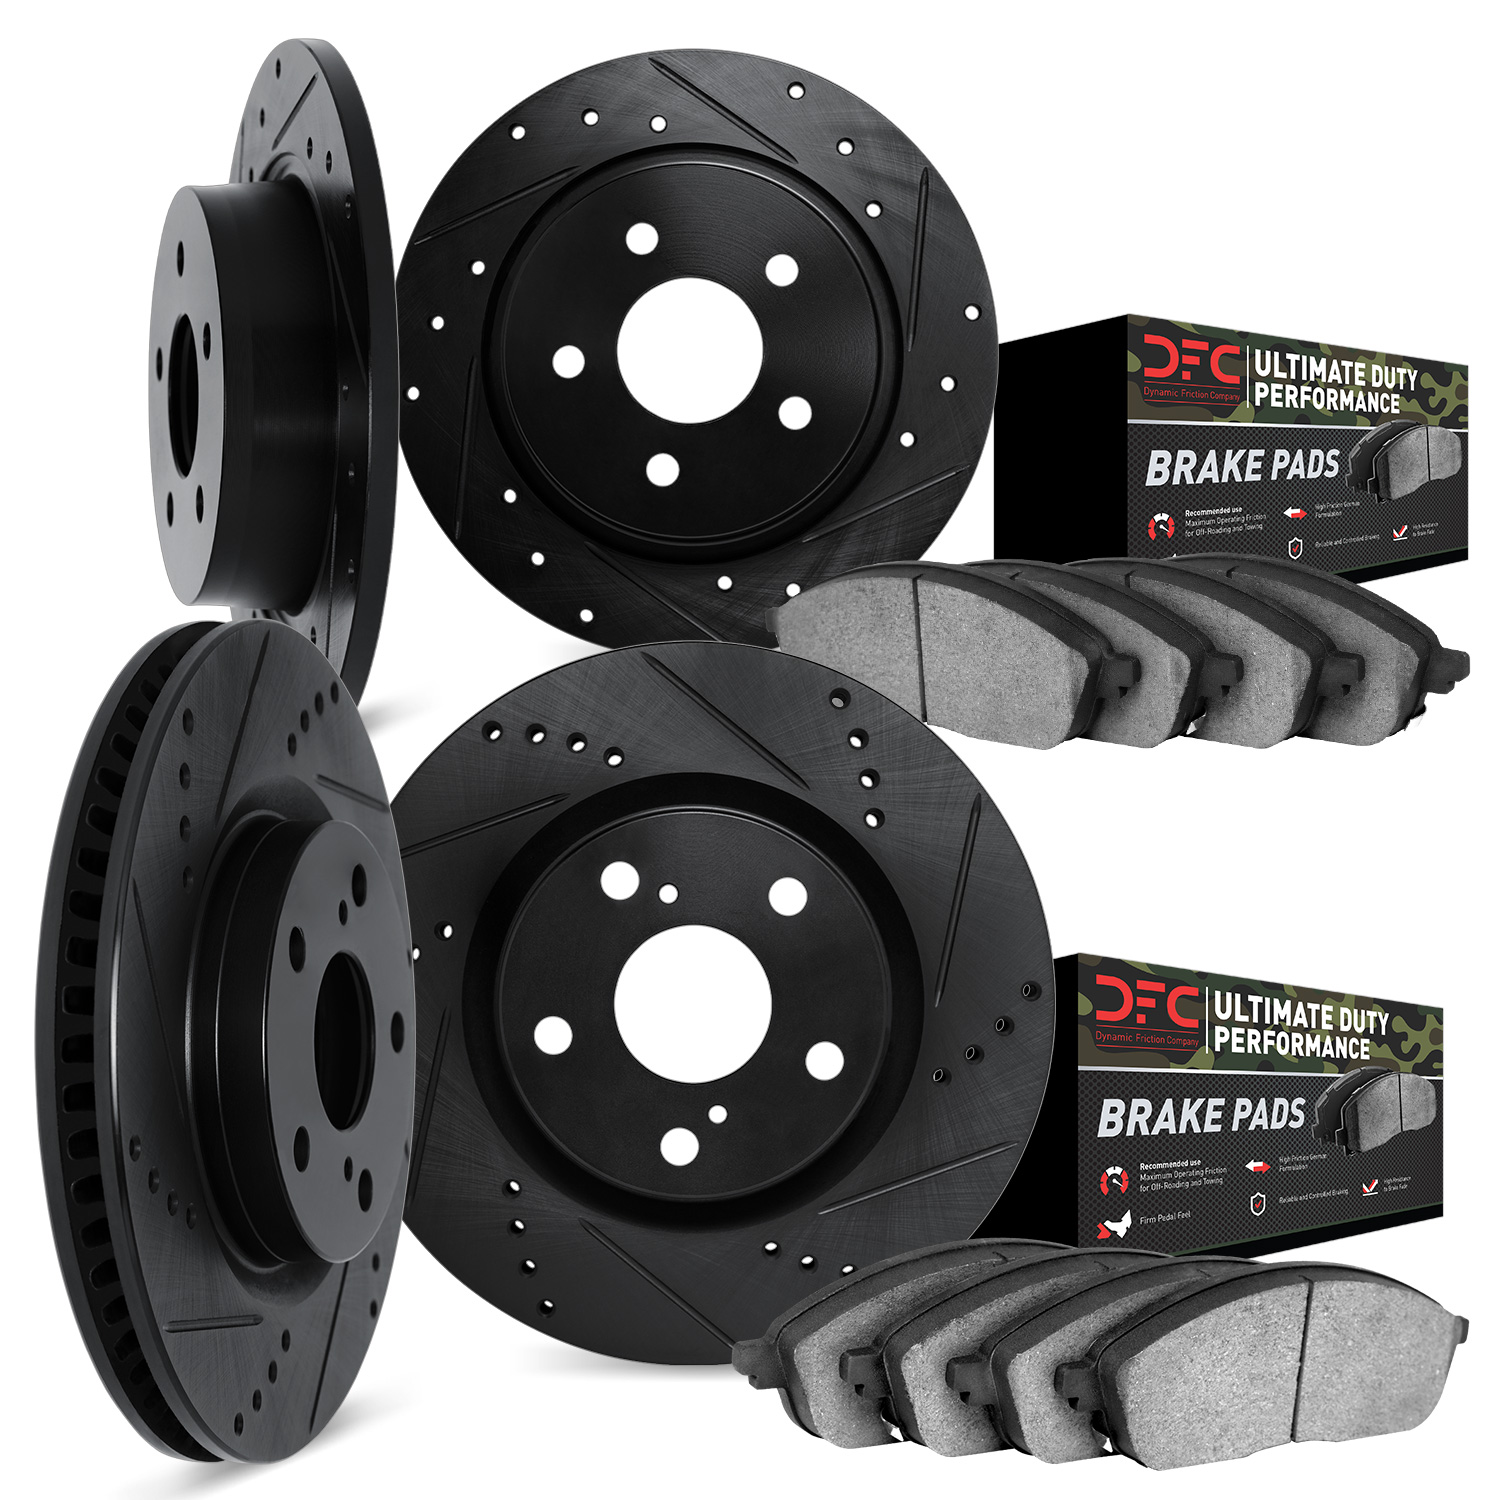 8404-42010 Drilled/Slotted Brake Rotors with Ultimate-Duty Brake Pads Kit [Black], 2011-2012 Mopar, Position: Front and Rear